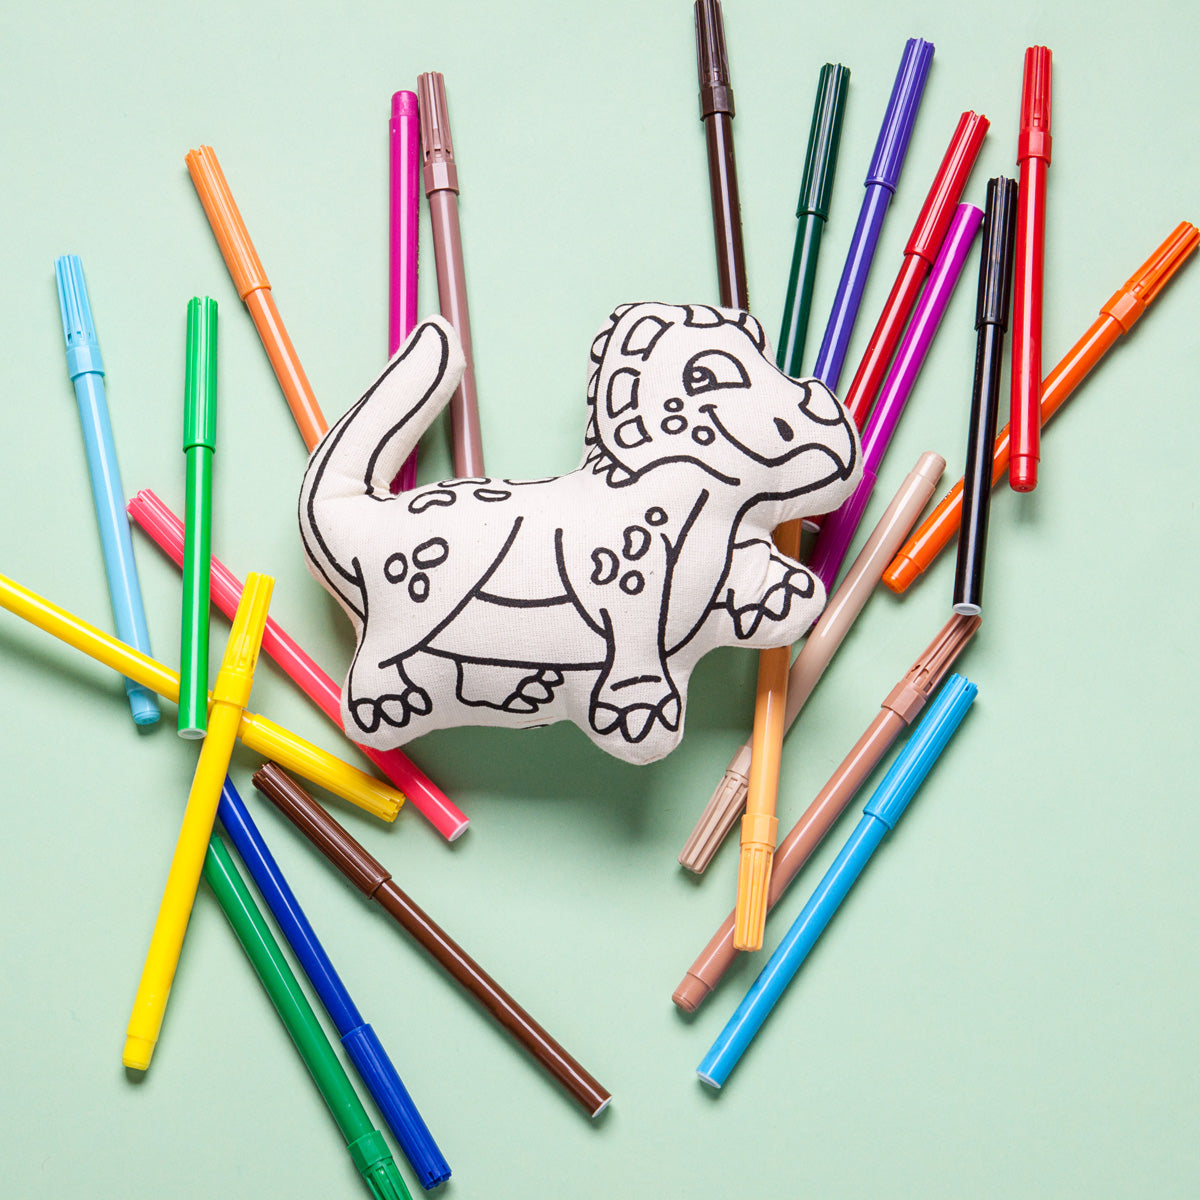 Kiboo Kids Jurassic Series: Triceratops Dinosaur for Coloring and Creative Play